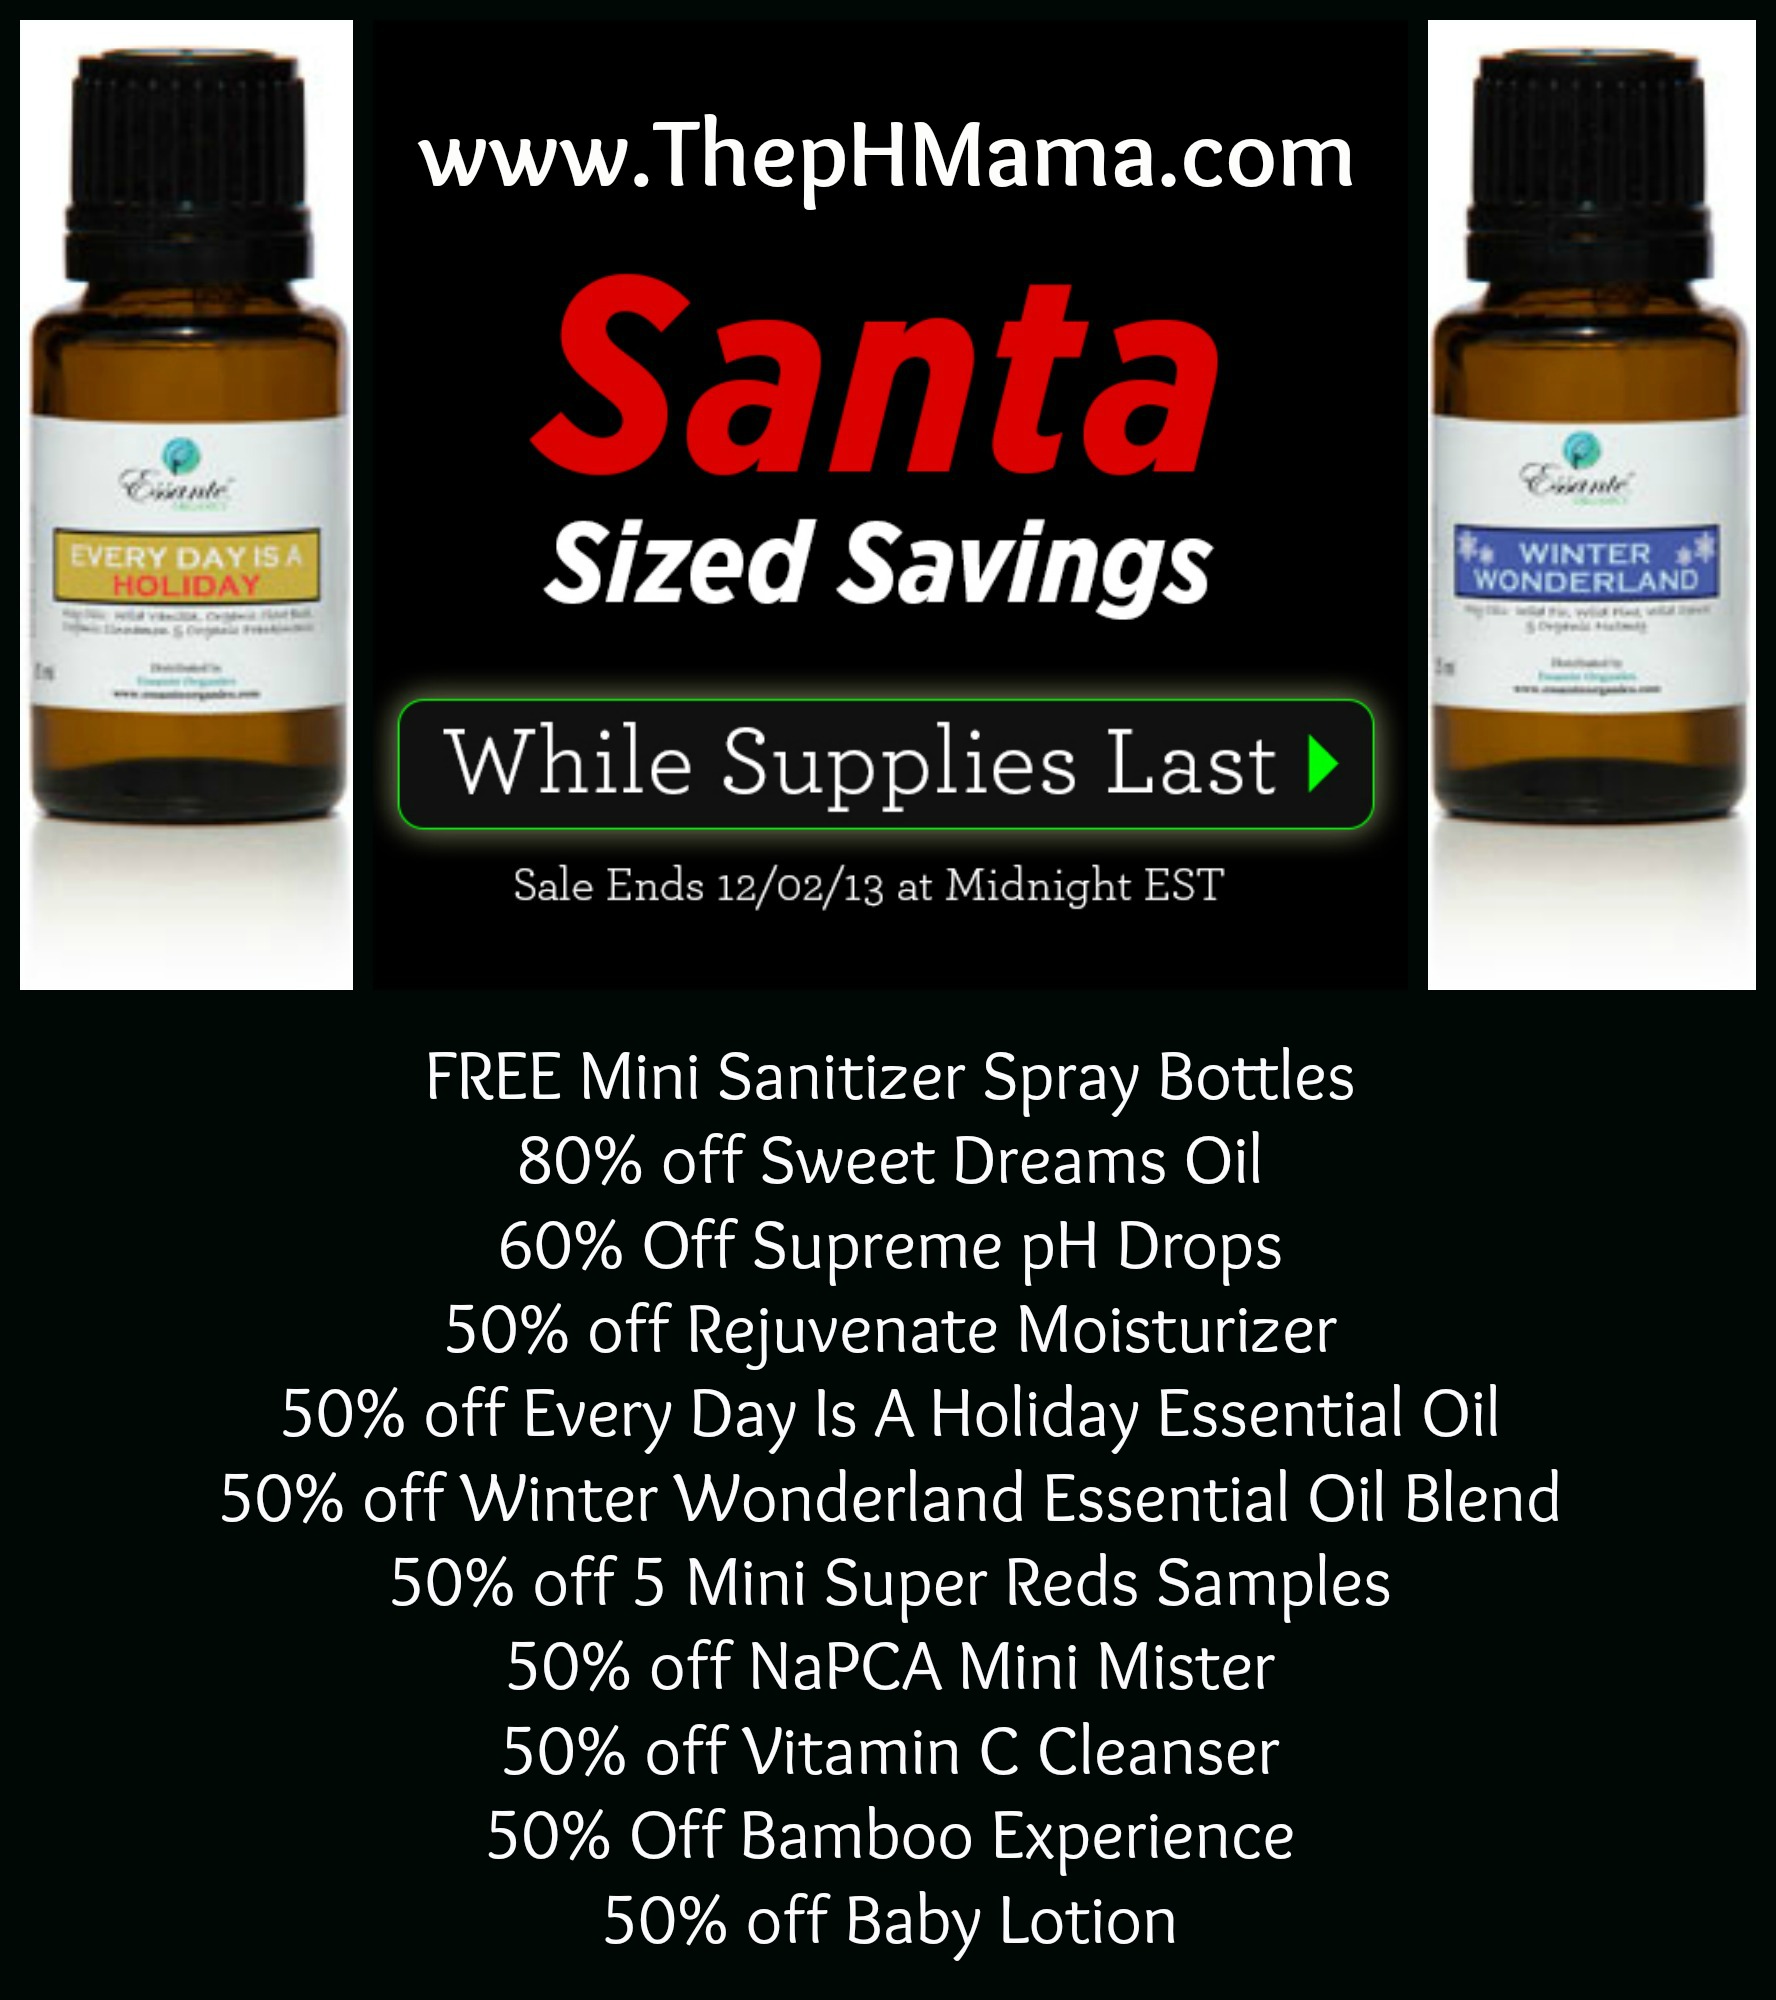 cyber monday, Essante, organic essential oils, beauty, baby, nutrition, work at home, business, deal, 50% off, 60% off, 80% off, free, www.ThepHMama.com